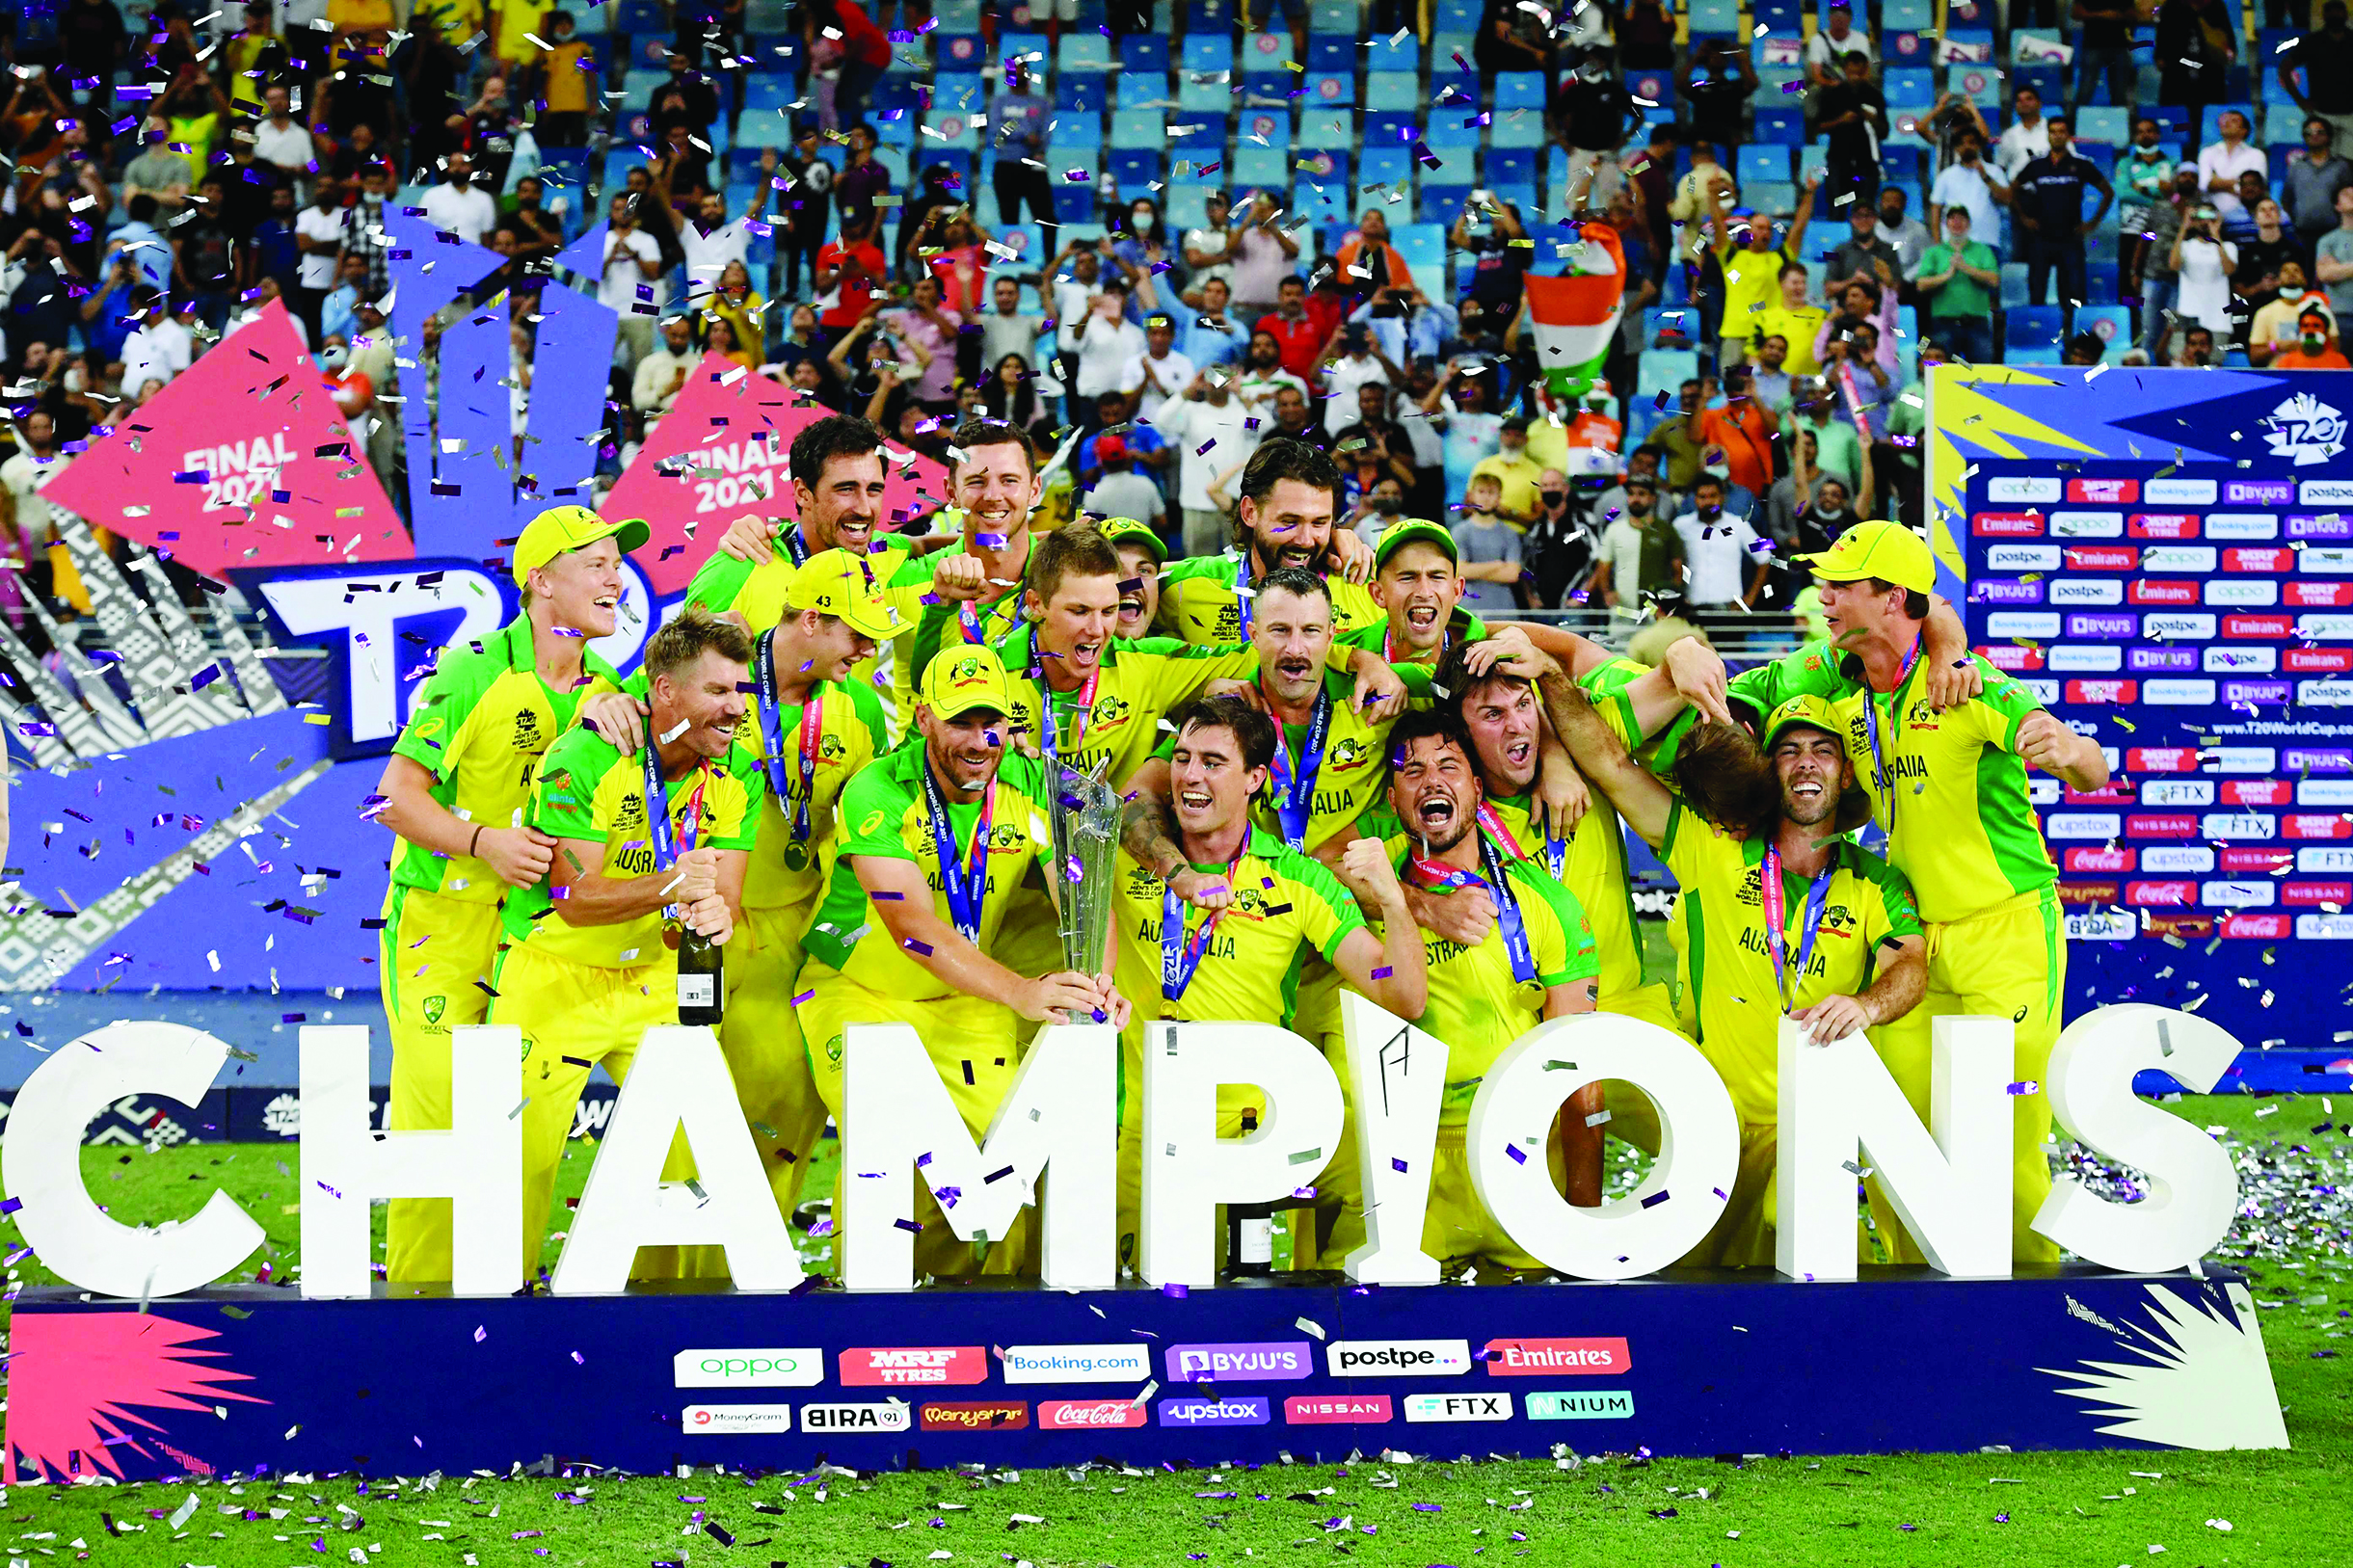 DUBAI: Australia's players pose with the trophy after winning the ICC men's Twenty20 World Cup final match against New Zealand at the Dubai International Cricket Stadium yesterday. - AFP n